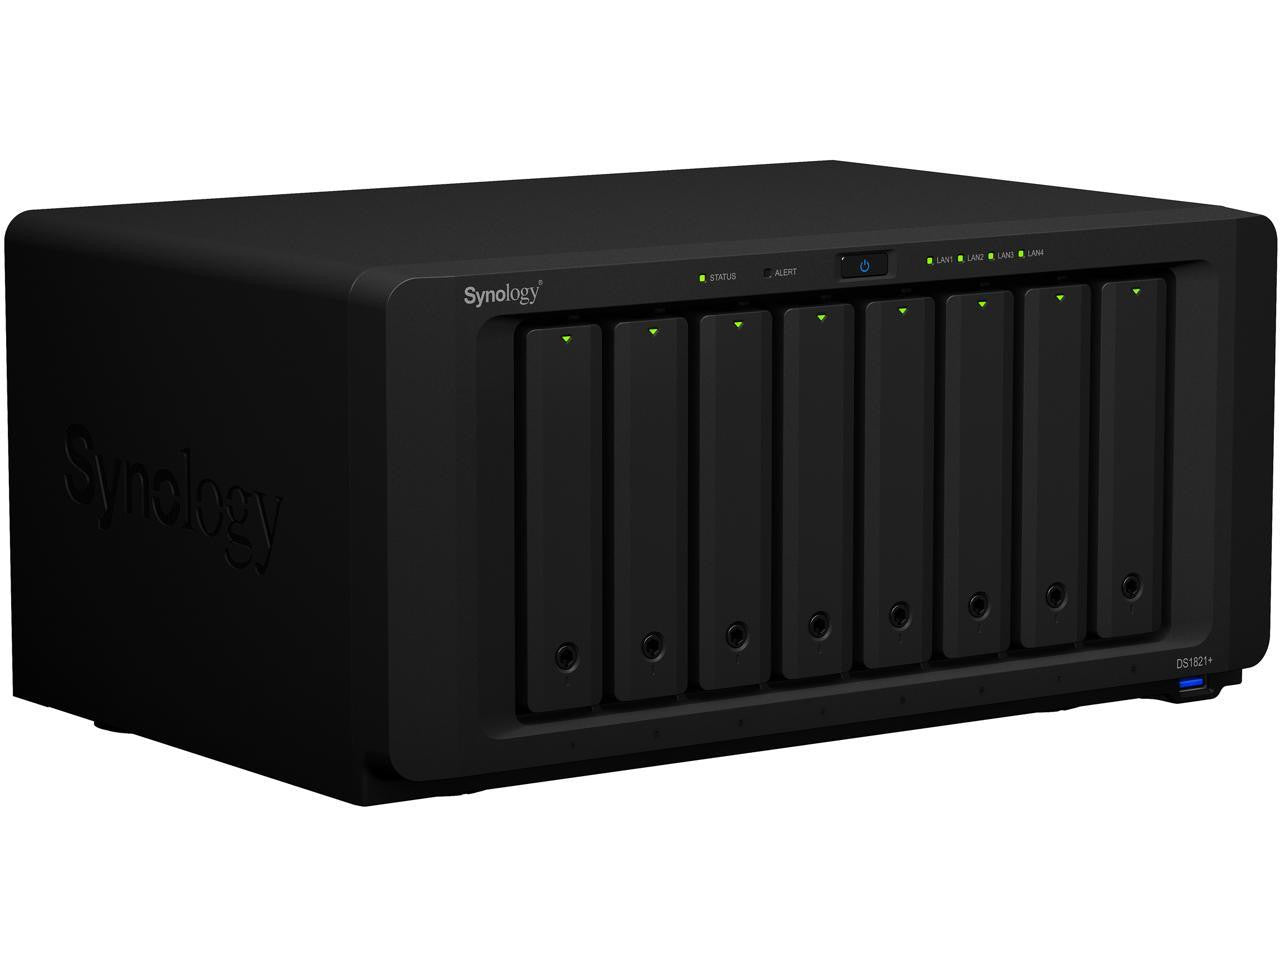 Synology DS1821+ 8-BAY DiskStation with 32GB Synology RAM and 80TB (8x10TB) Western Digital RED PLUS Drives Fully Assembled and Tested